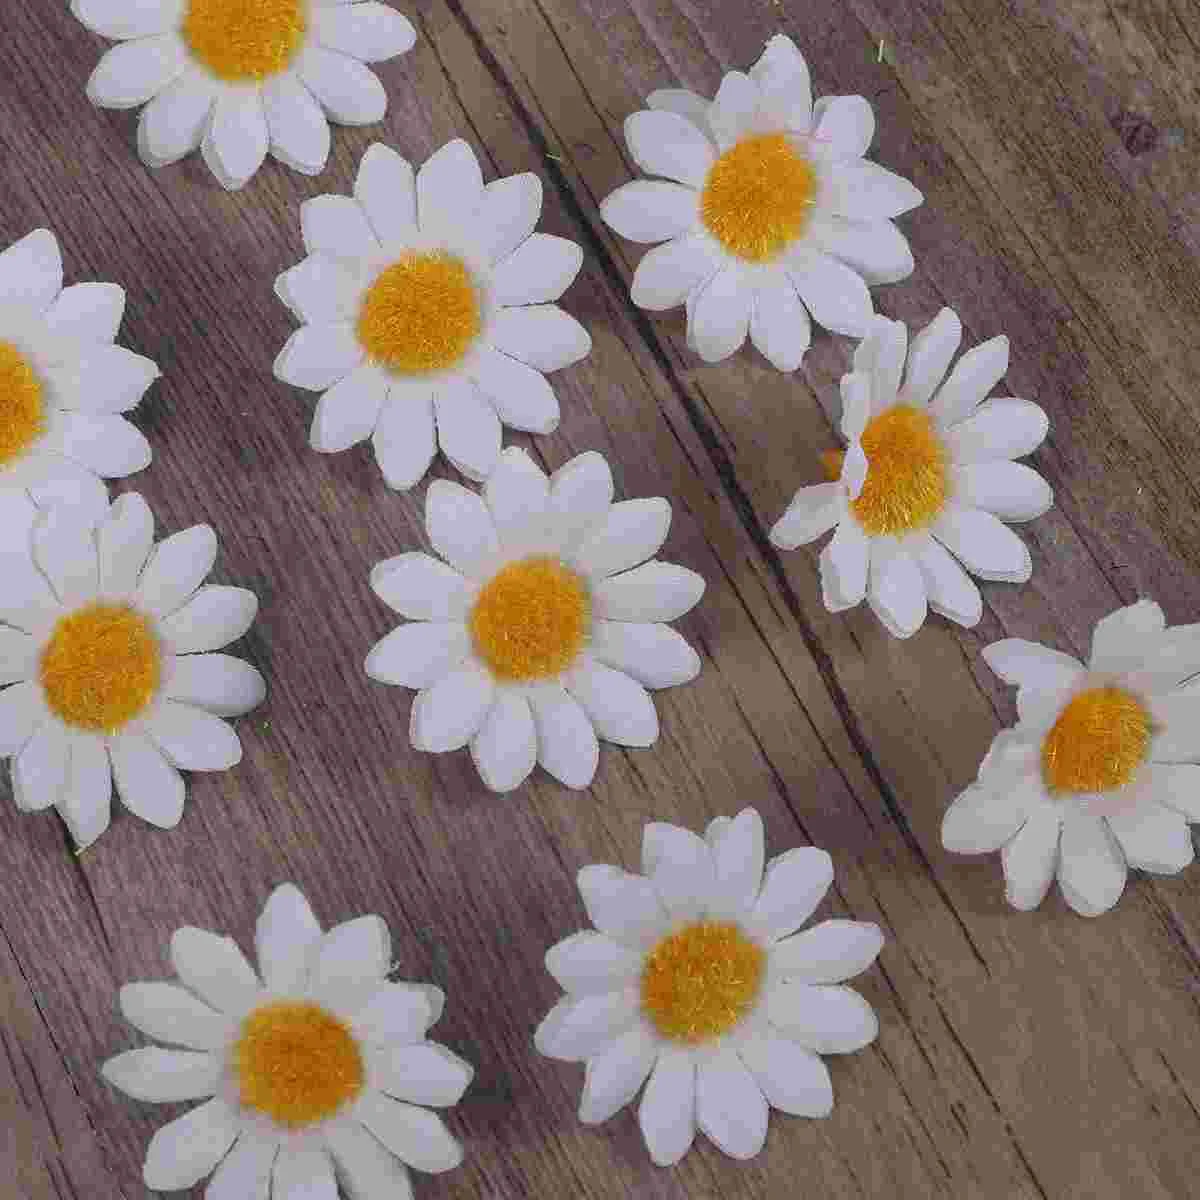 

100 Pcs Garland Table Fake Flowers Cake Decorating Bridal Holding Flower Artificial Wreath Gerbera Daisy Heads Decorations